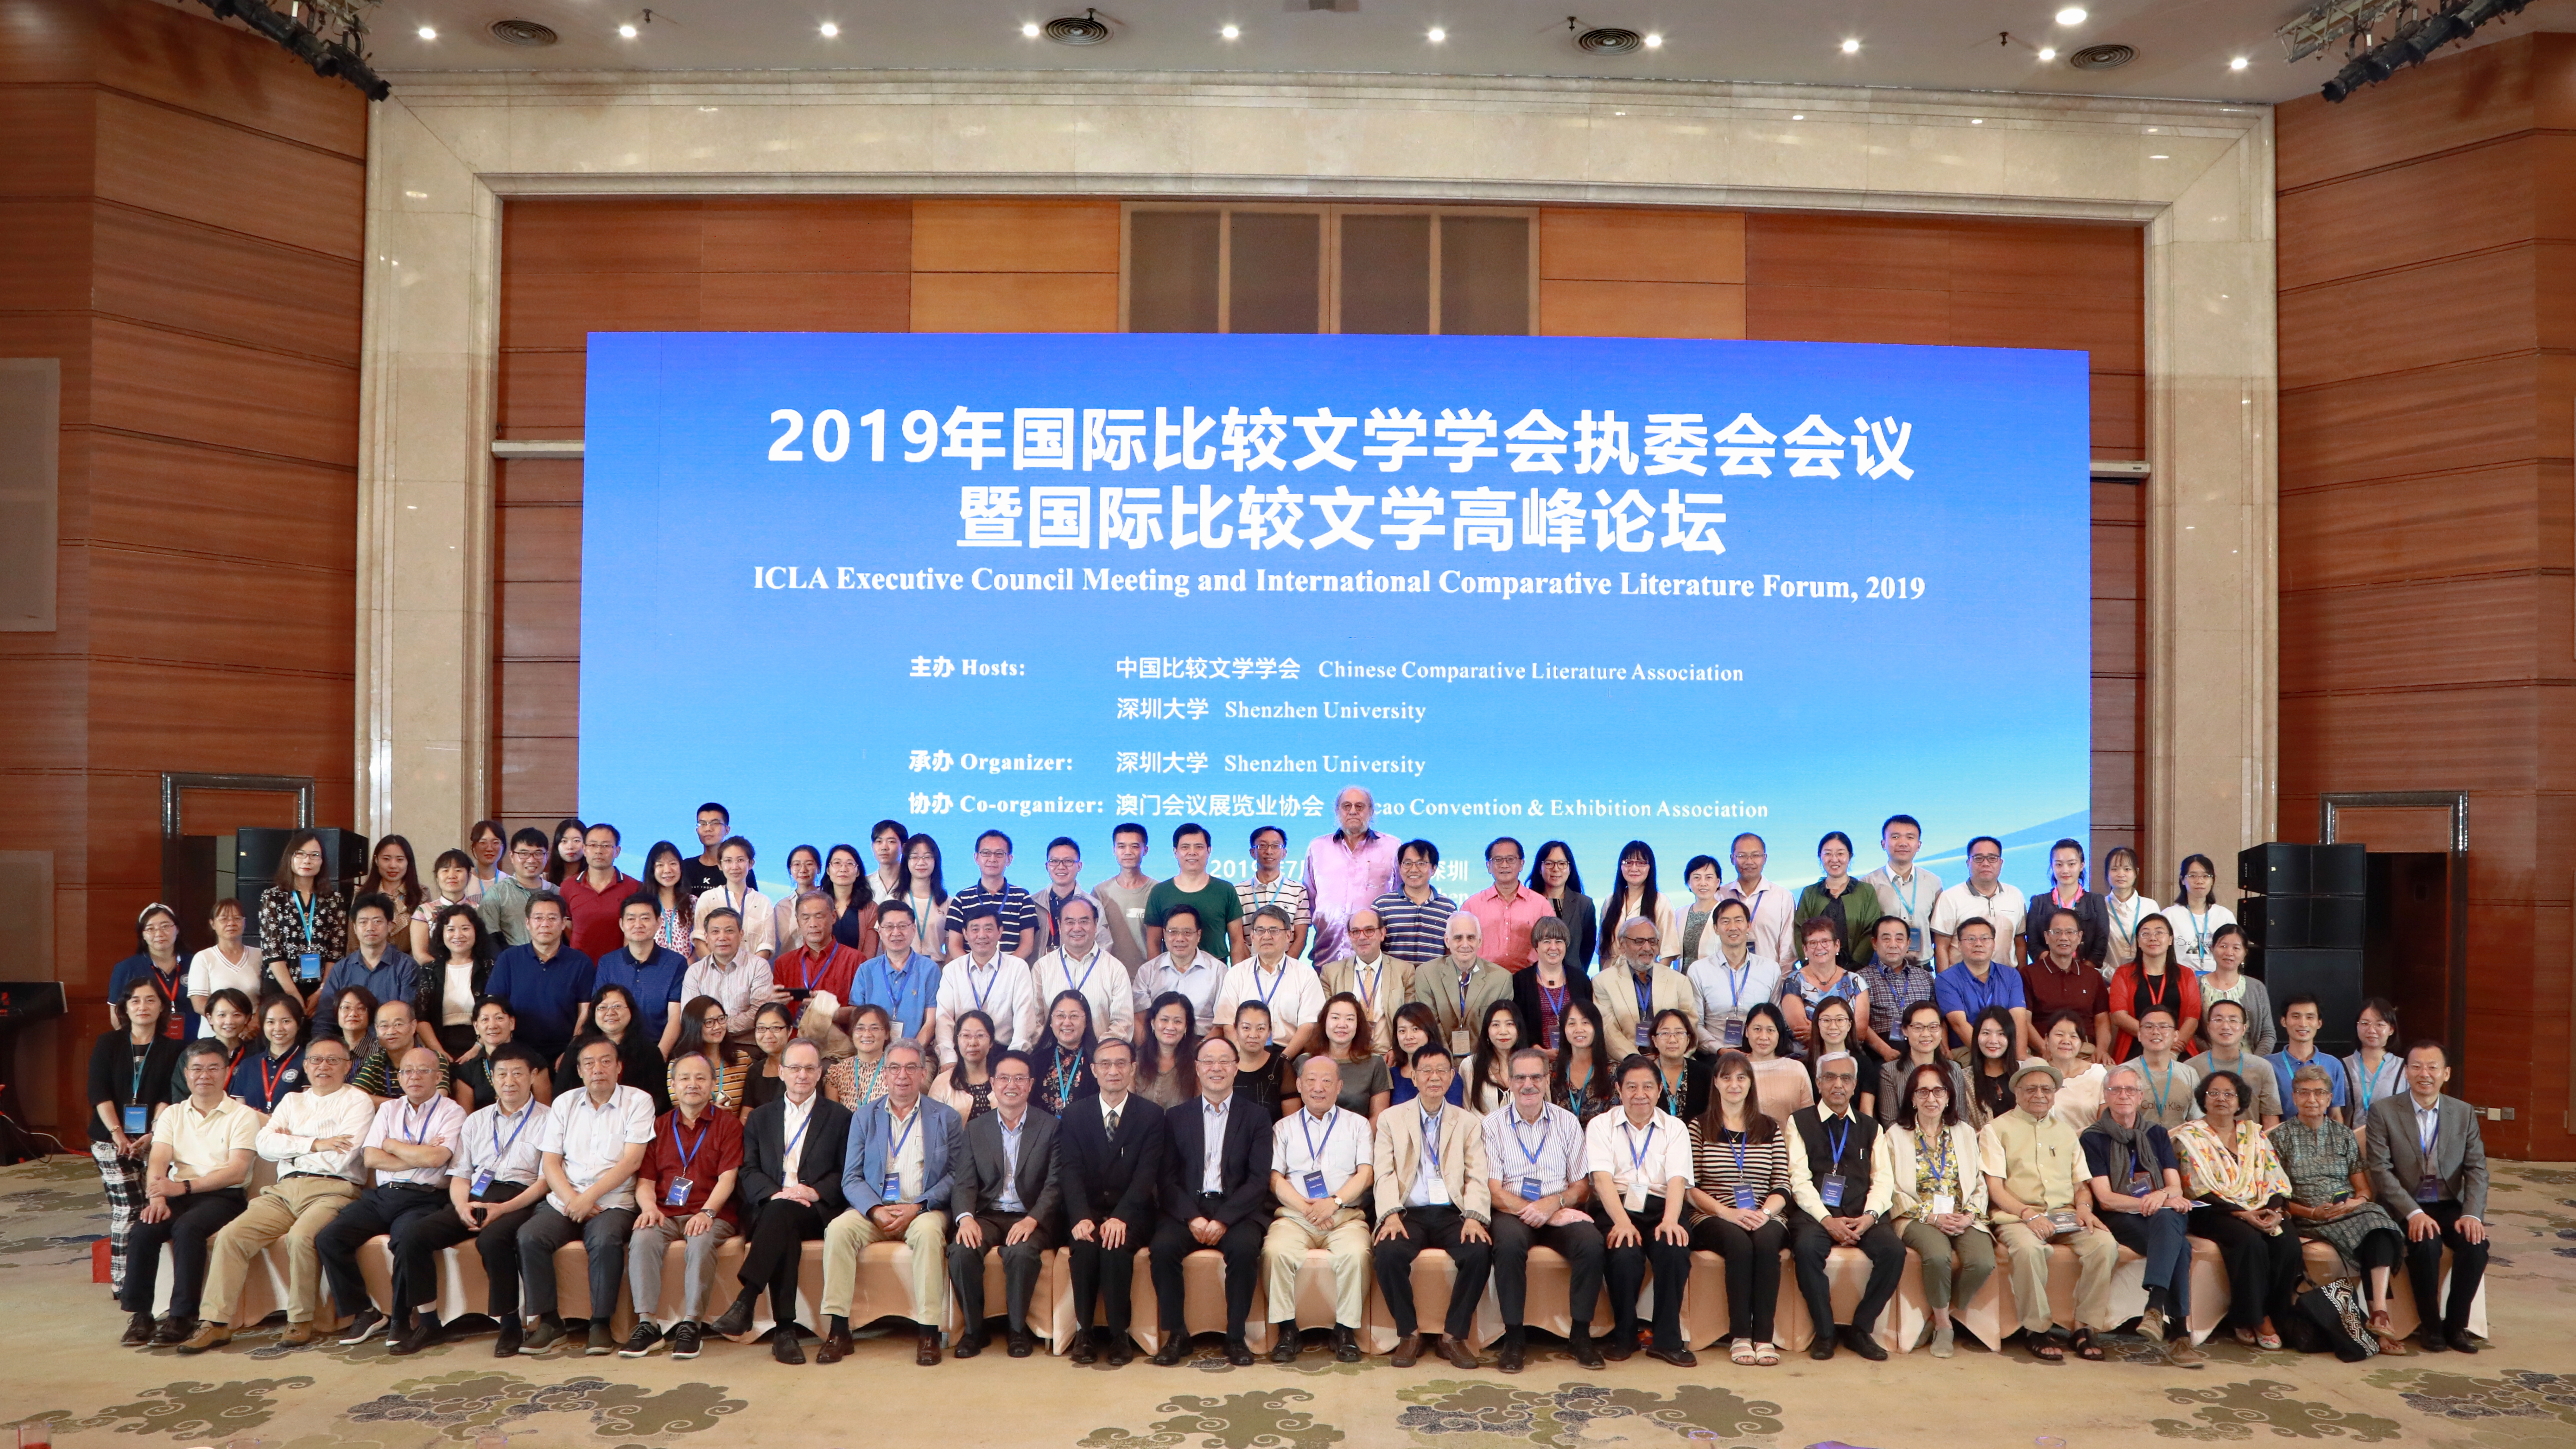 Executive Committee Council of International Comparative Literature Association and International Comparative Literature Summit Forum, 2019